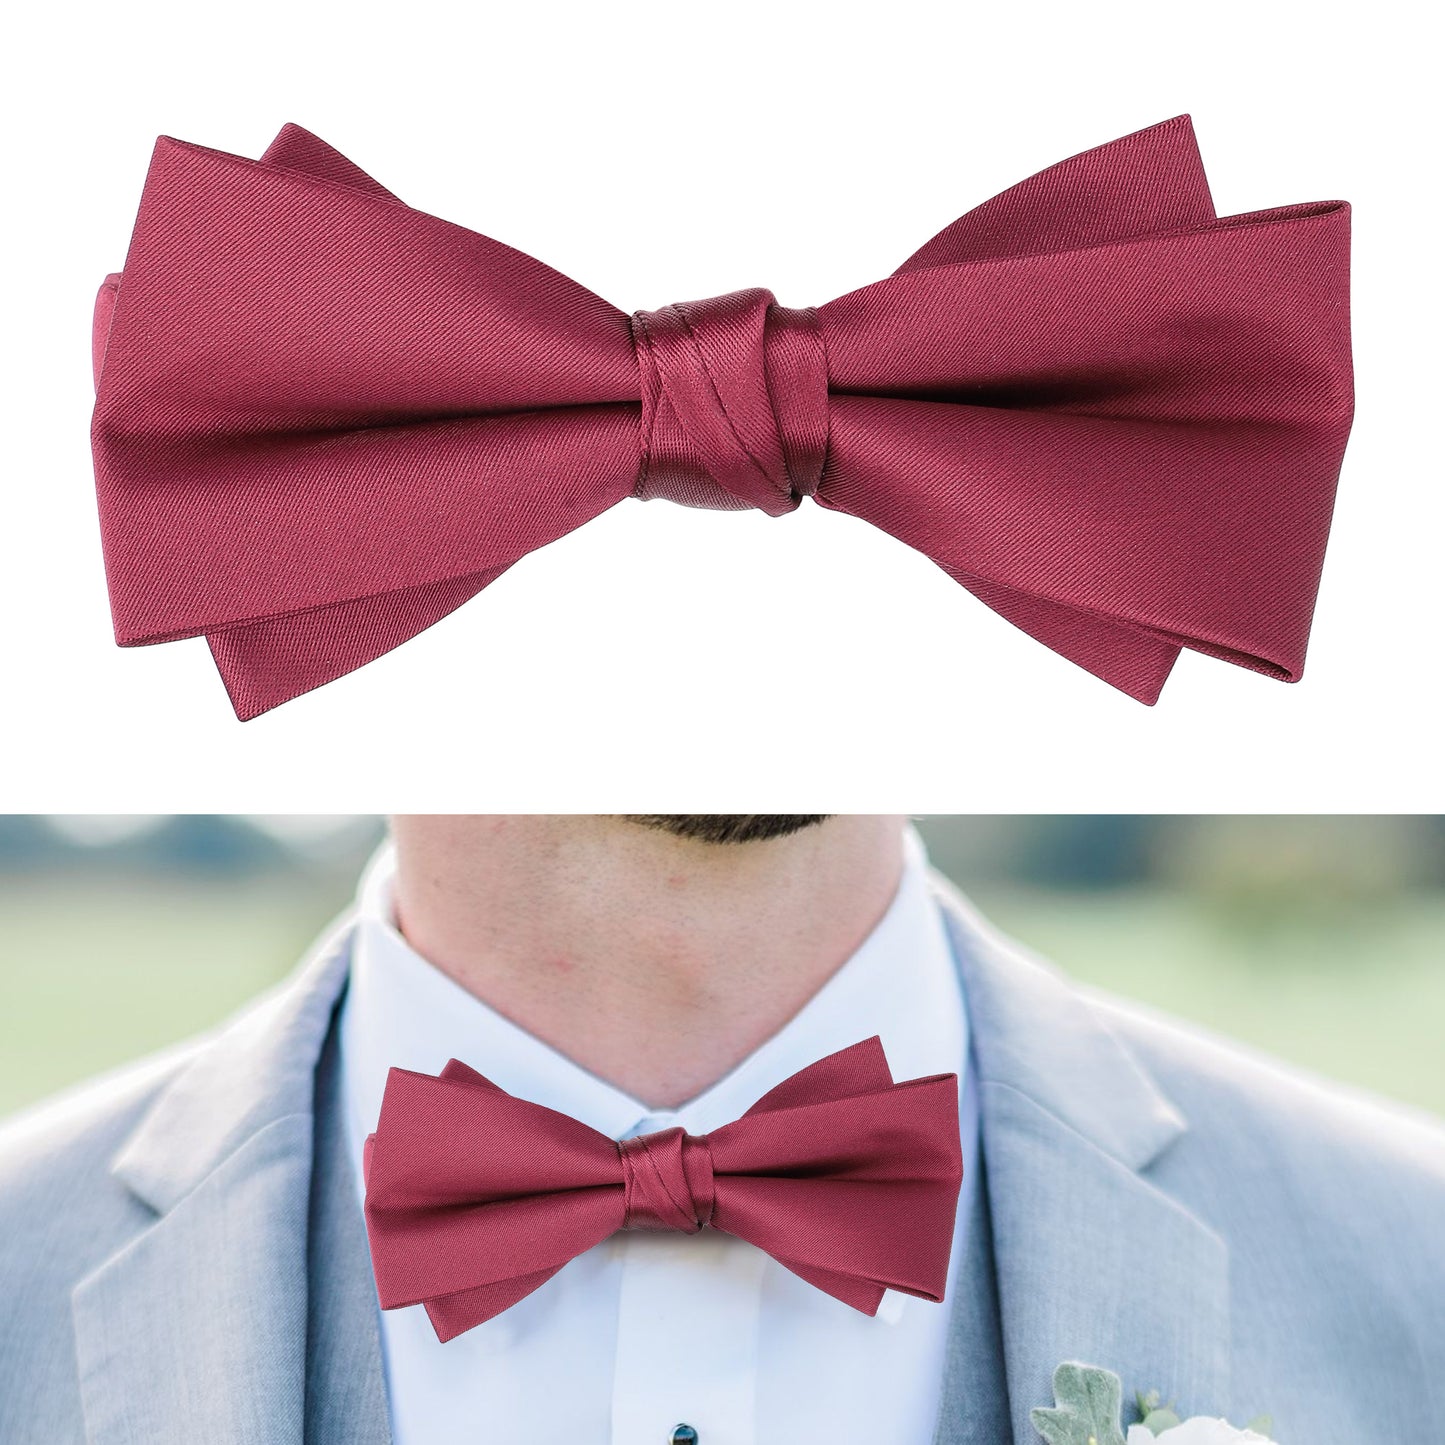 Classic Bow Tie Set - Red Silk Bow Tie with Gift Box for Men and Boys